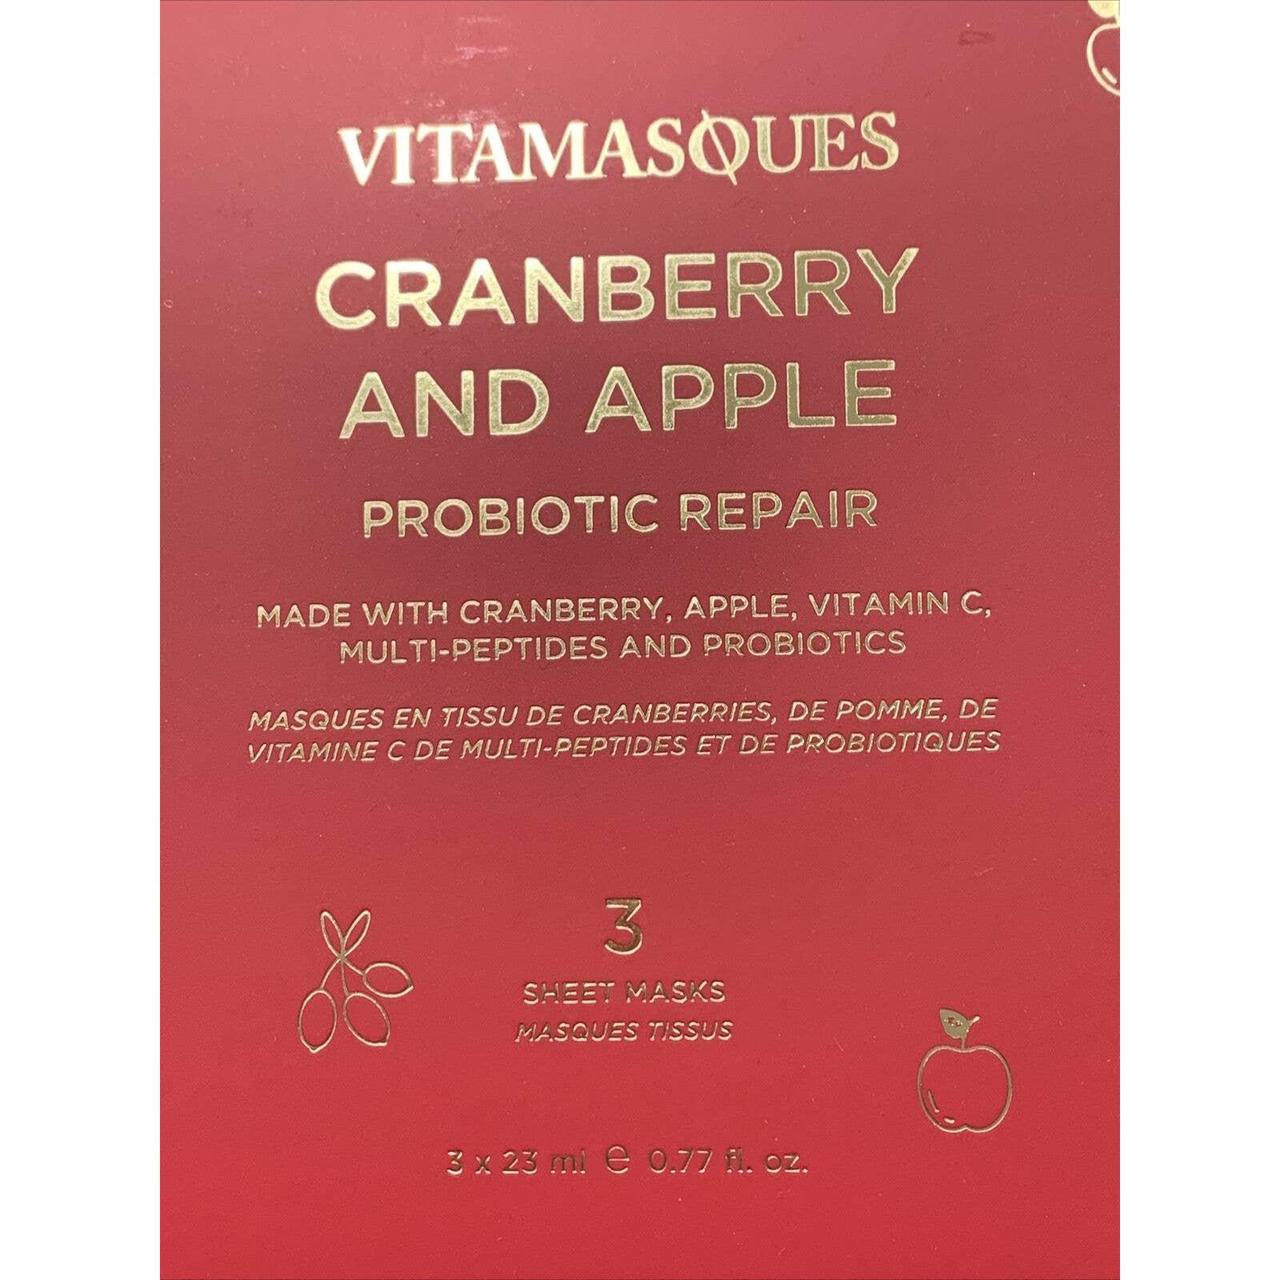 Product Image 2 - VITAMASQUES Cranberry and Apple Probiotic